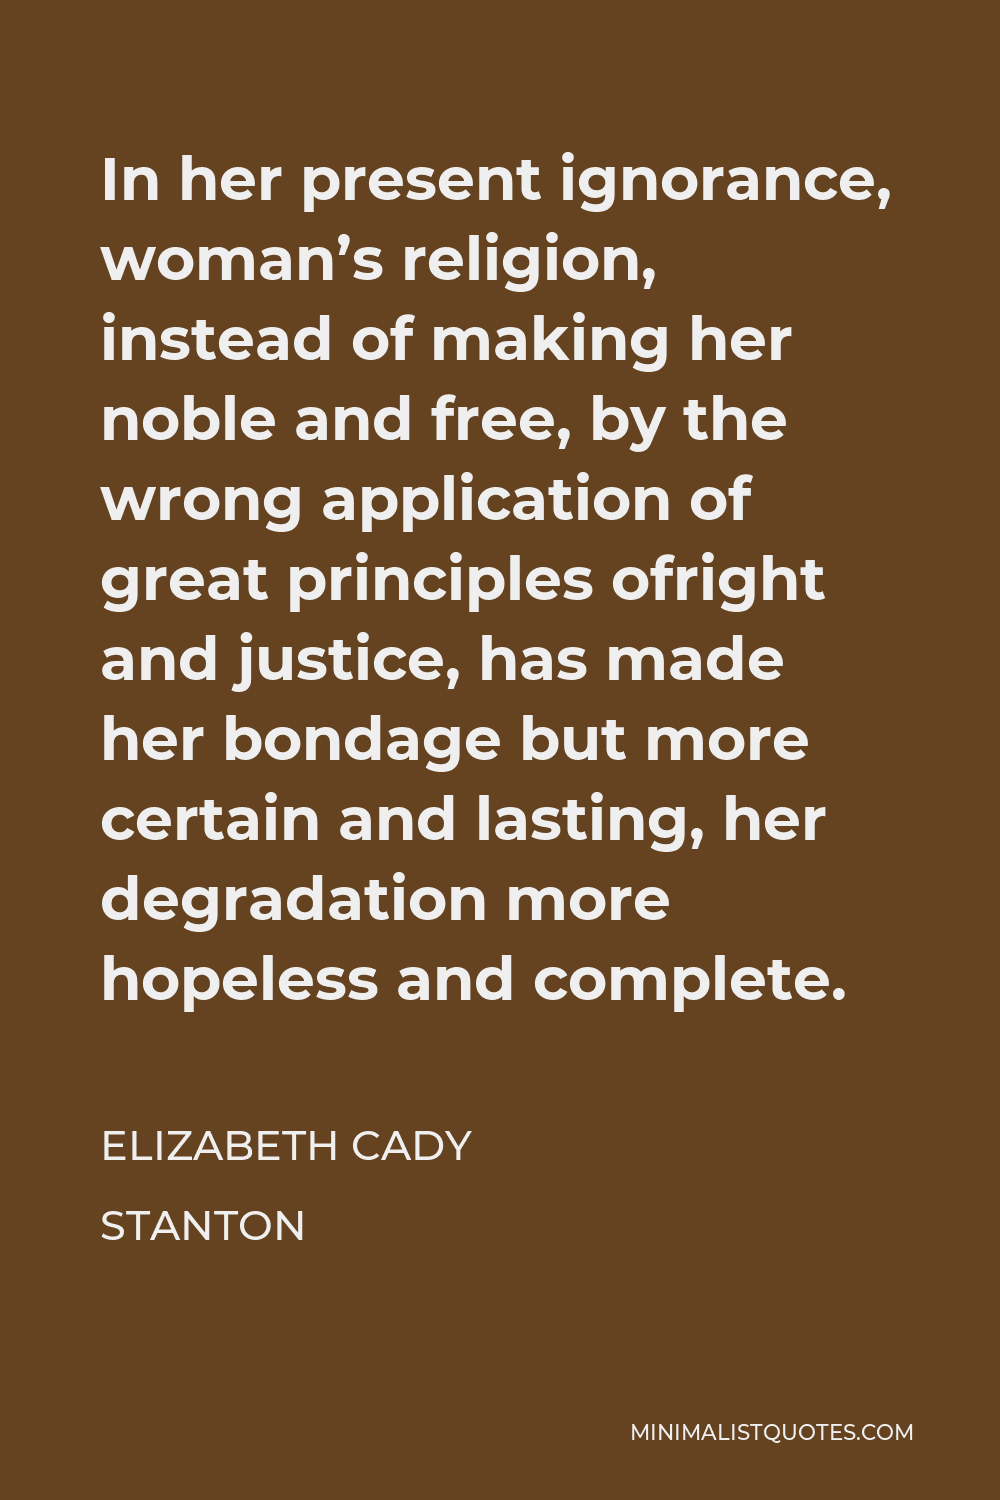 Elizabeth Cady Stanton Quote - In her present ignorance, woman’s religion, instead of making her noble and free, by the wrong application of great principles ofright and justice, has made her bondage but more certain and lasting, her degradation more hopeless and complete.